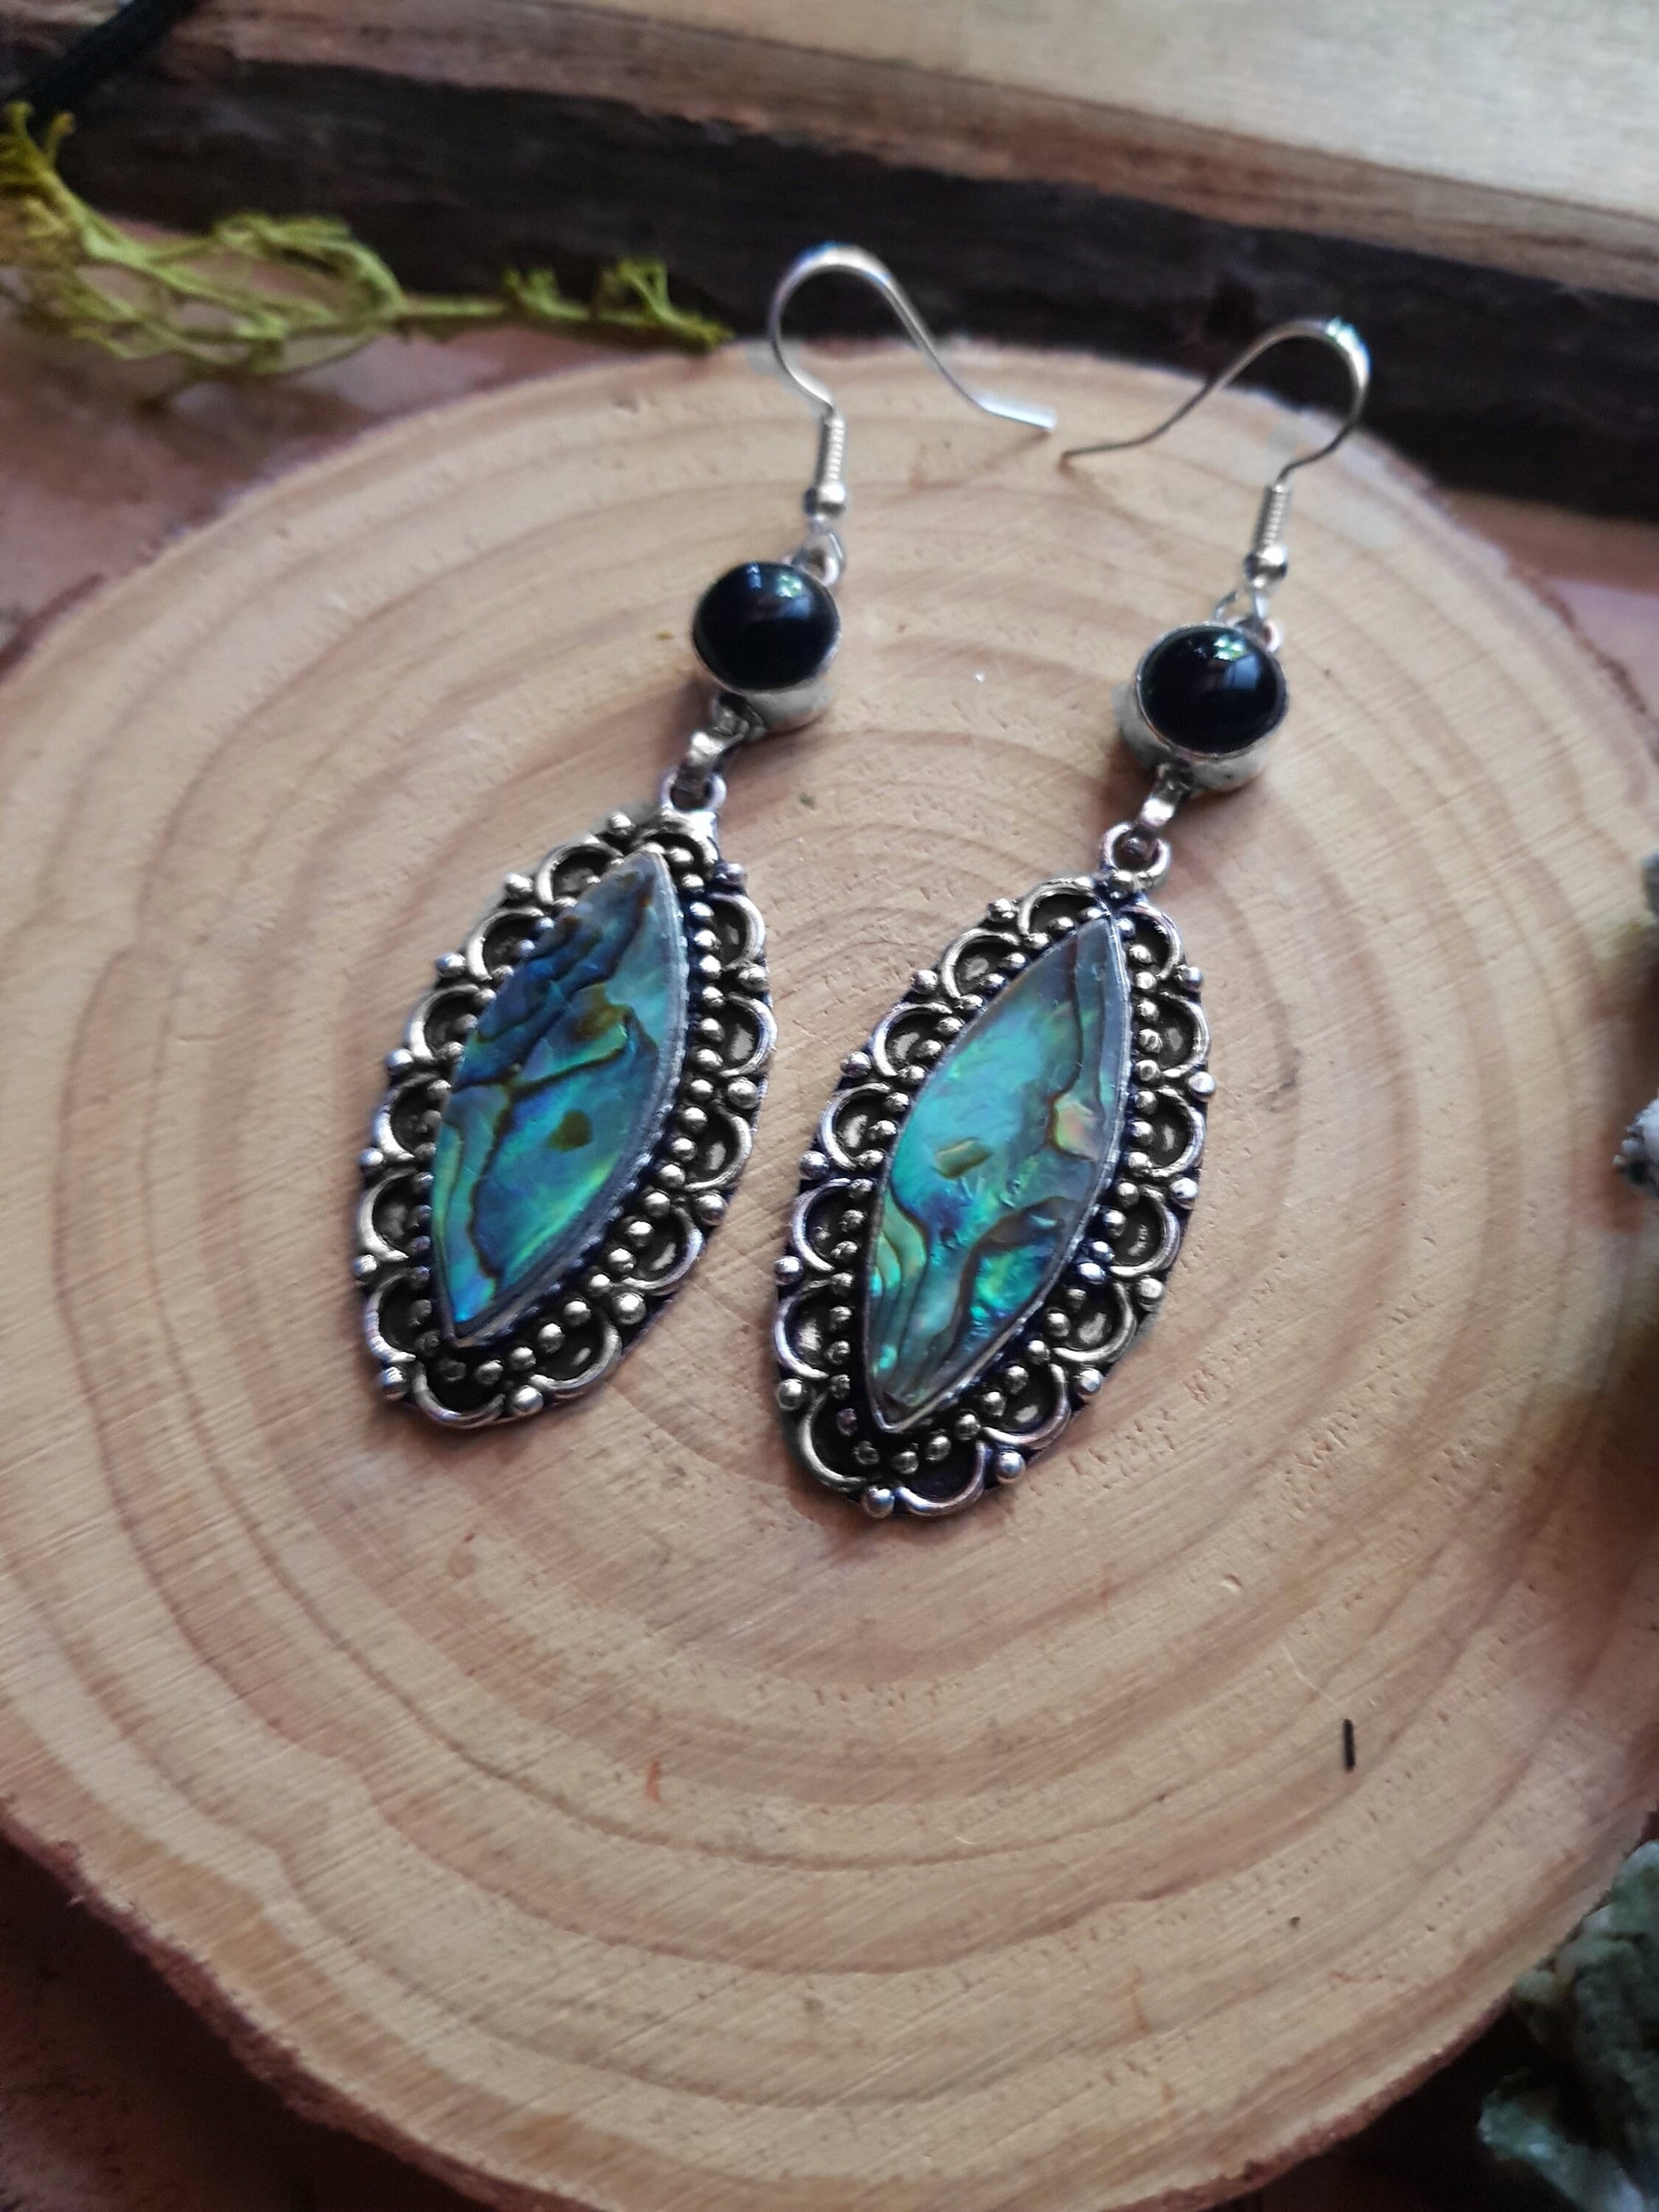 Labradorite And Abalone Shell Earrings In Sterling Silver, Statement Dangle Earrings One Of A Kind